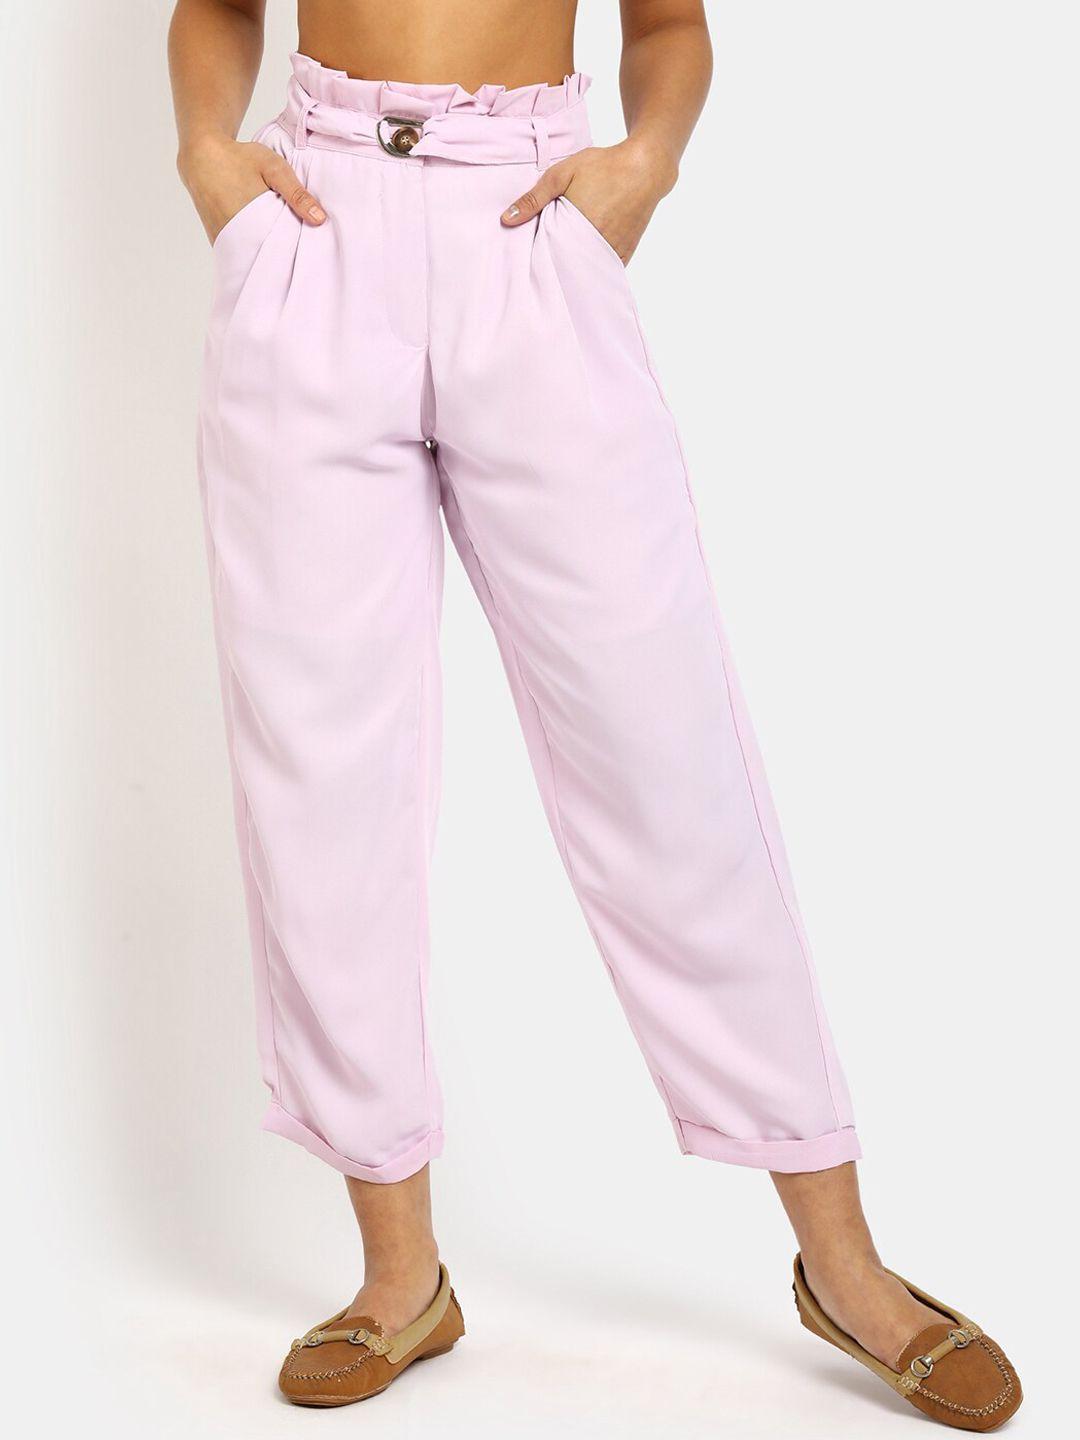 v-mart women lavender solid classic pleated trousers